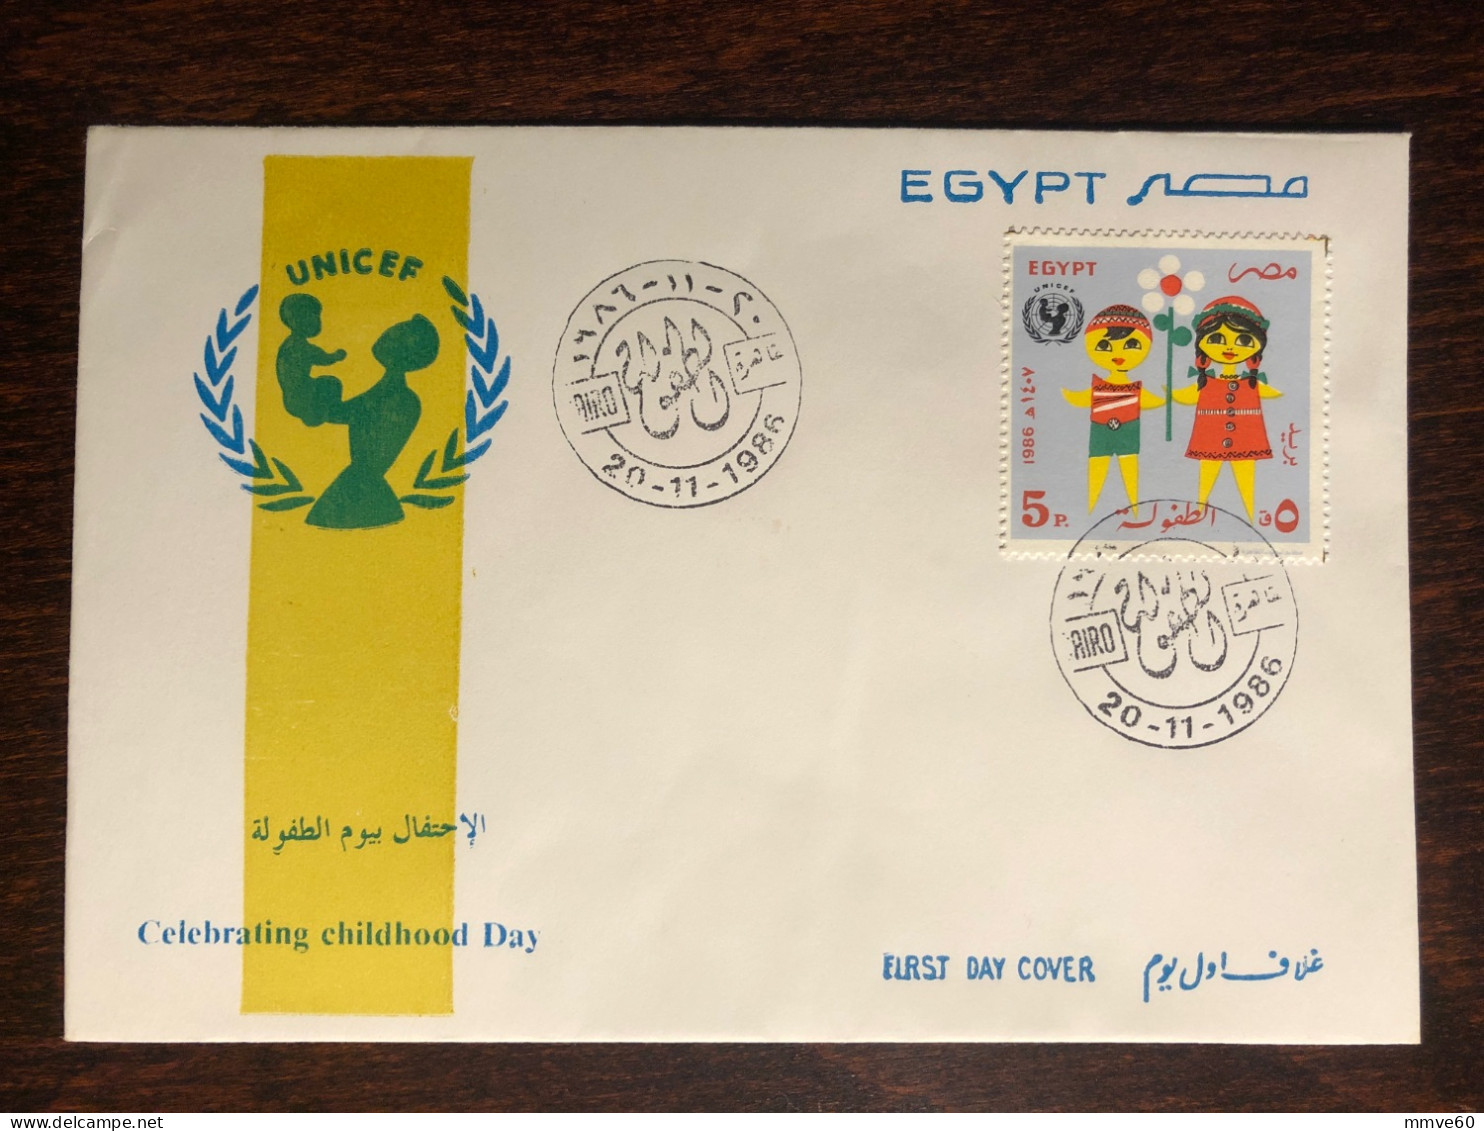 EGYPT FDC COVER 1986 YEAR UNICEF CHILDREN HEALTH MEDICINE - Covers & Documents